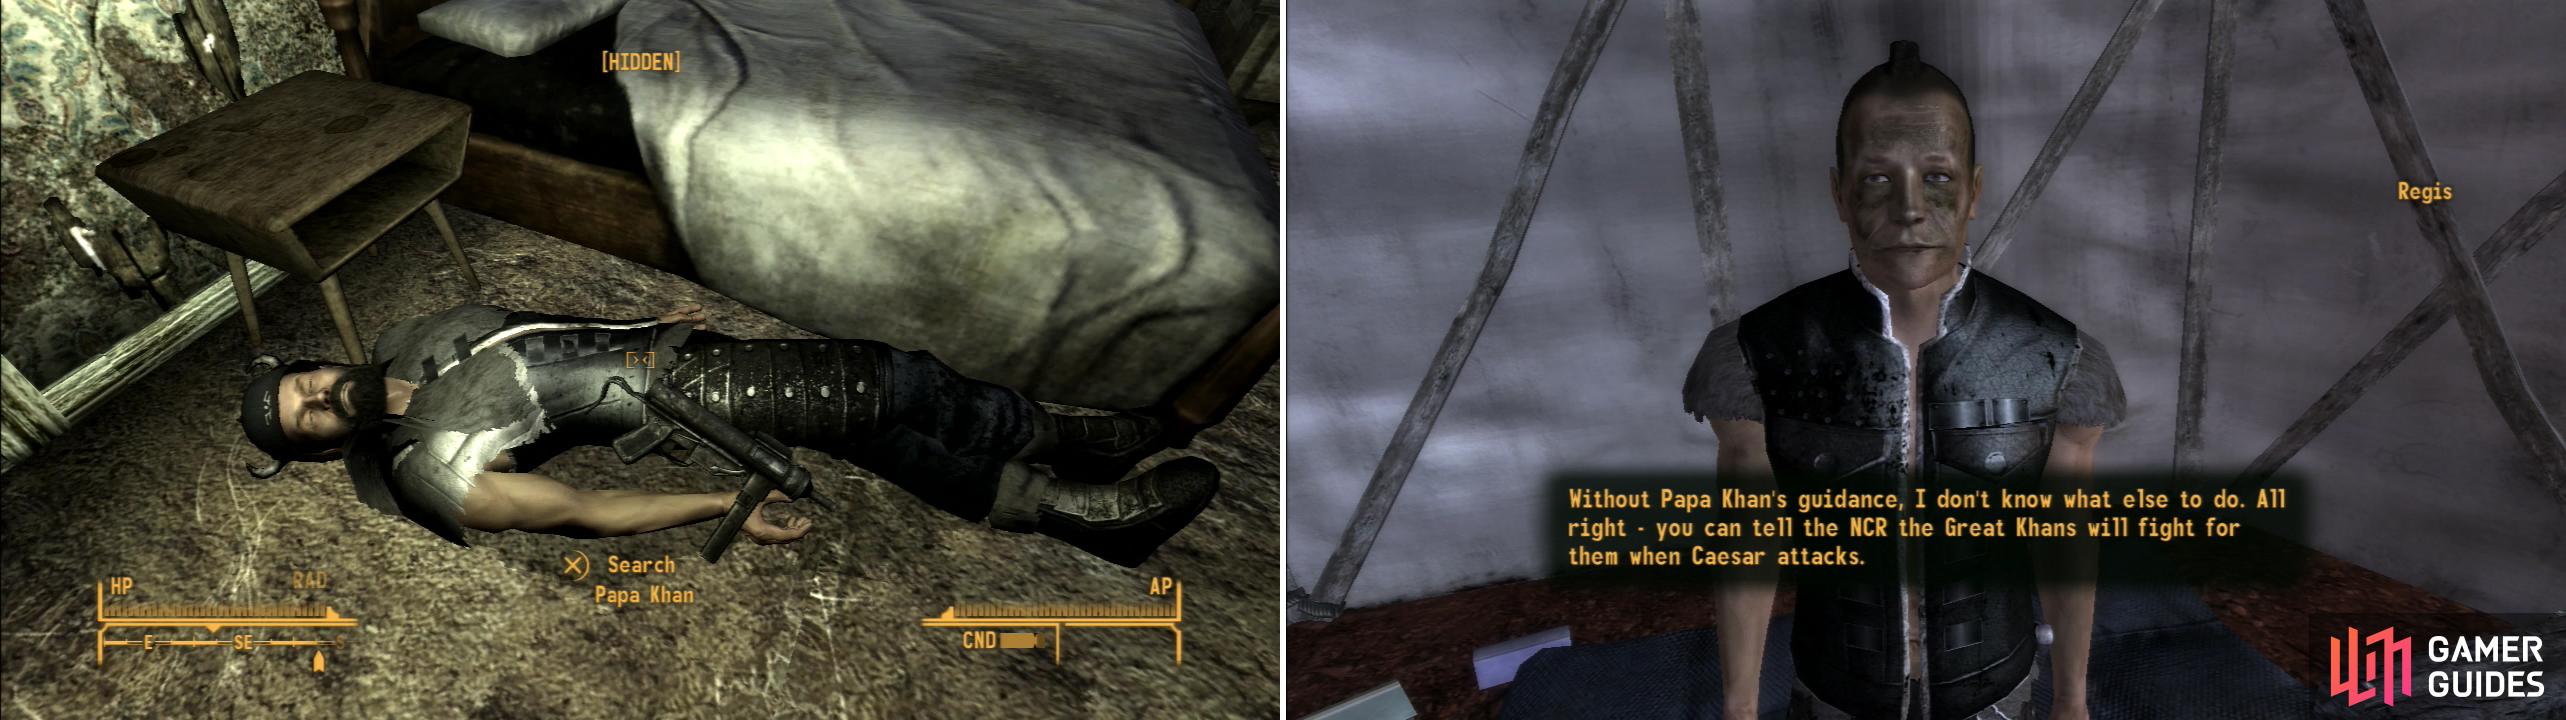 Assassinate Papa Khan at night in his room without being detected (left) and Regis, the new leader of the Khans, will side with the NCR (right).